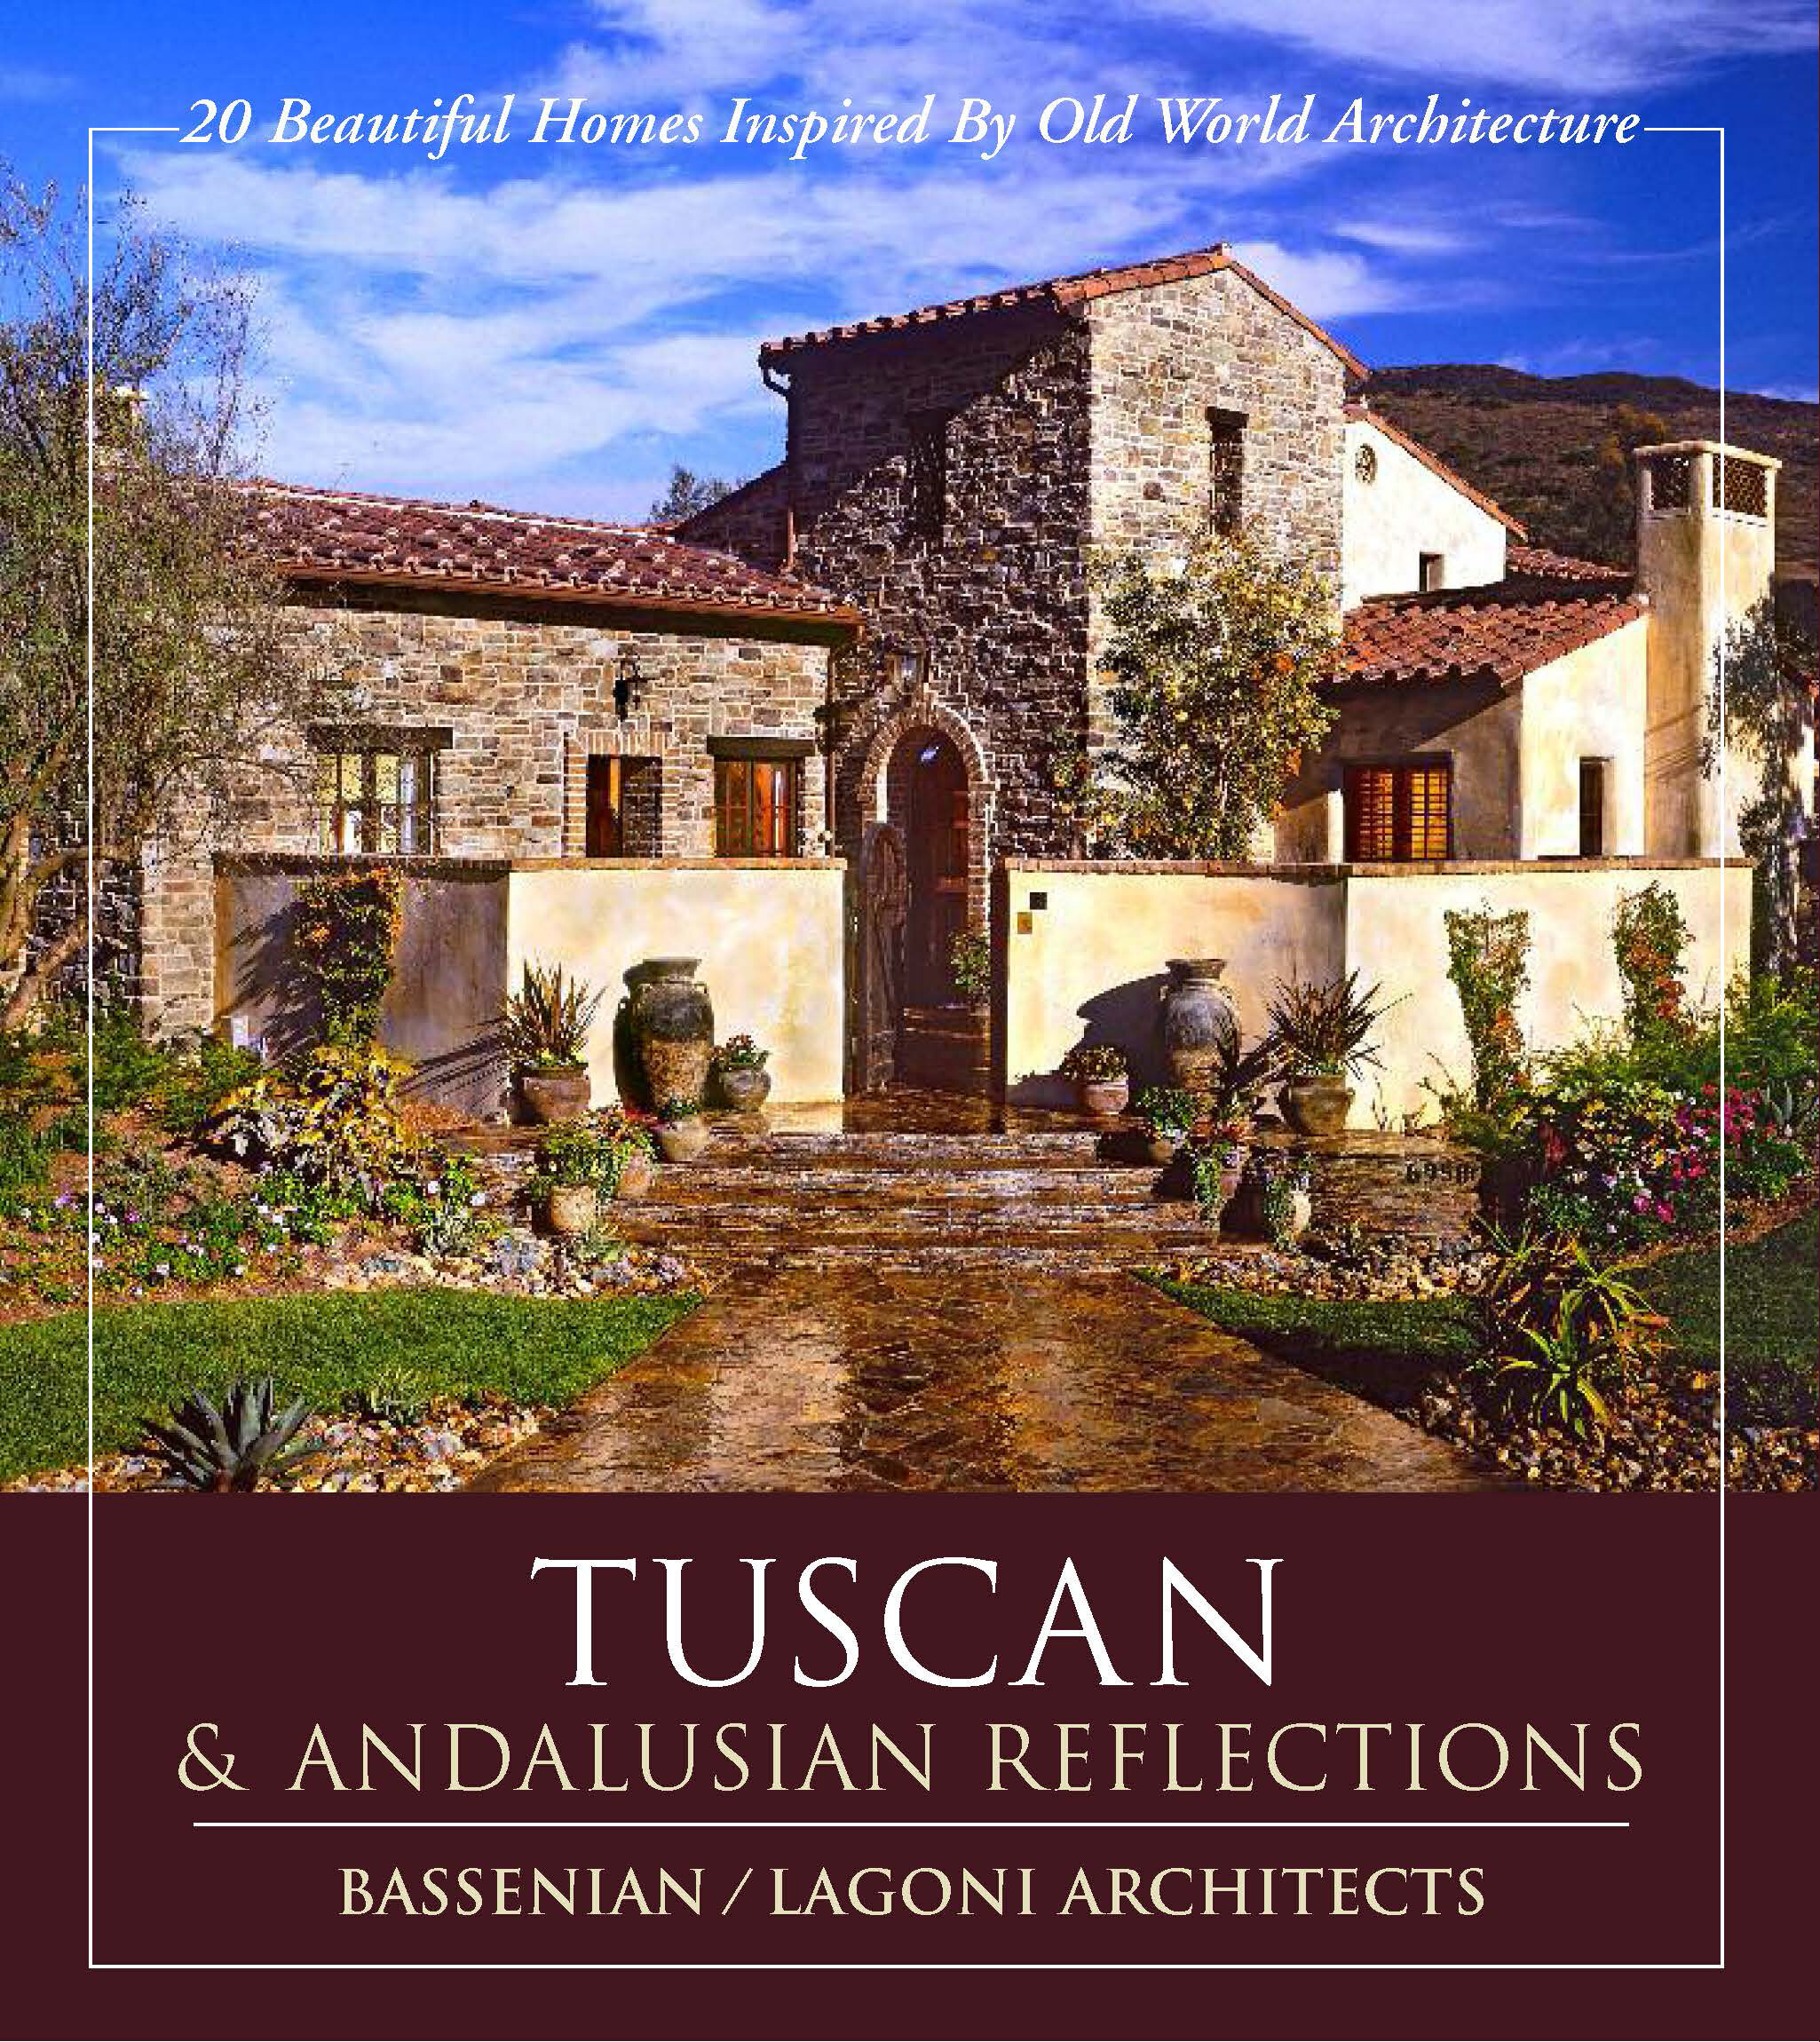 Tuscan & Andalusian Reflections_Page_01.jpg